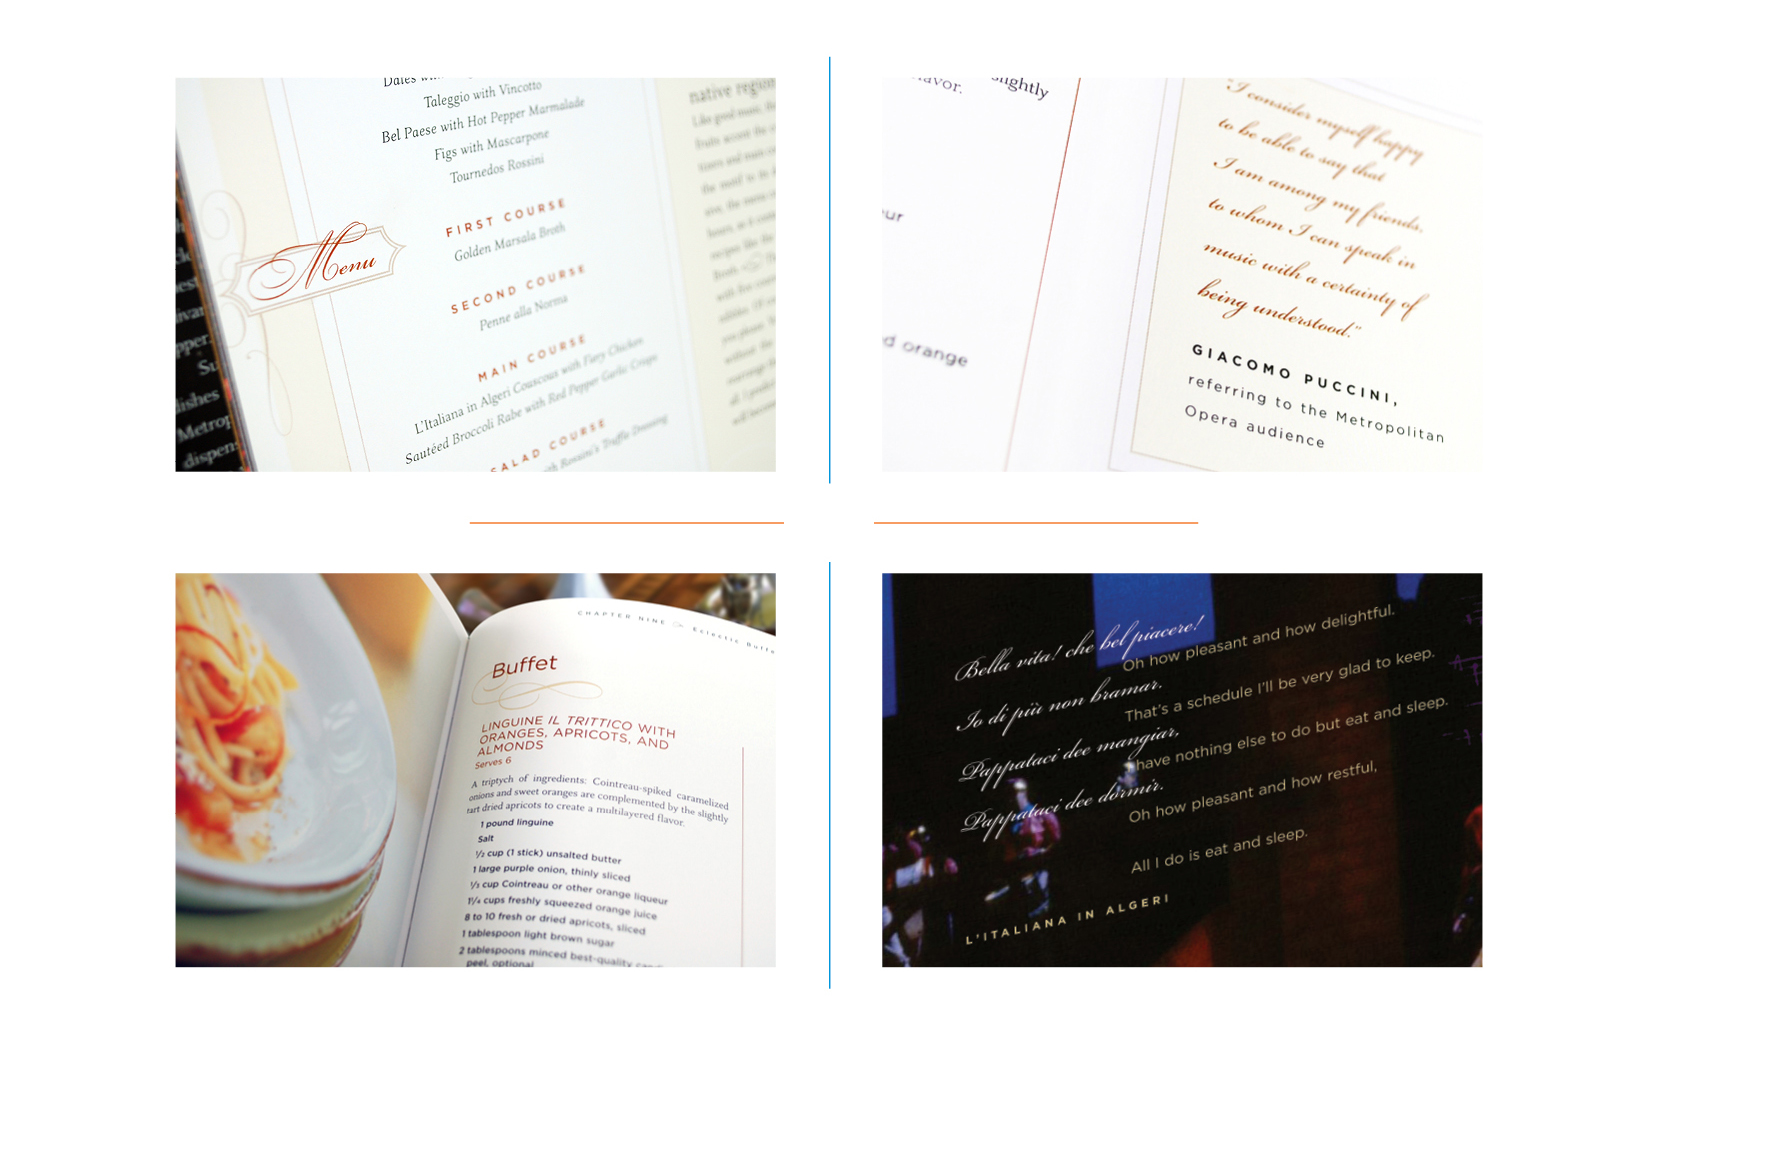   Interior details -  Chapter opener menu // Composer quote // Recipe // Opera lyric with translation    